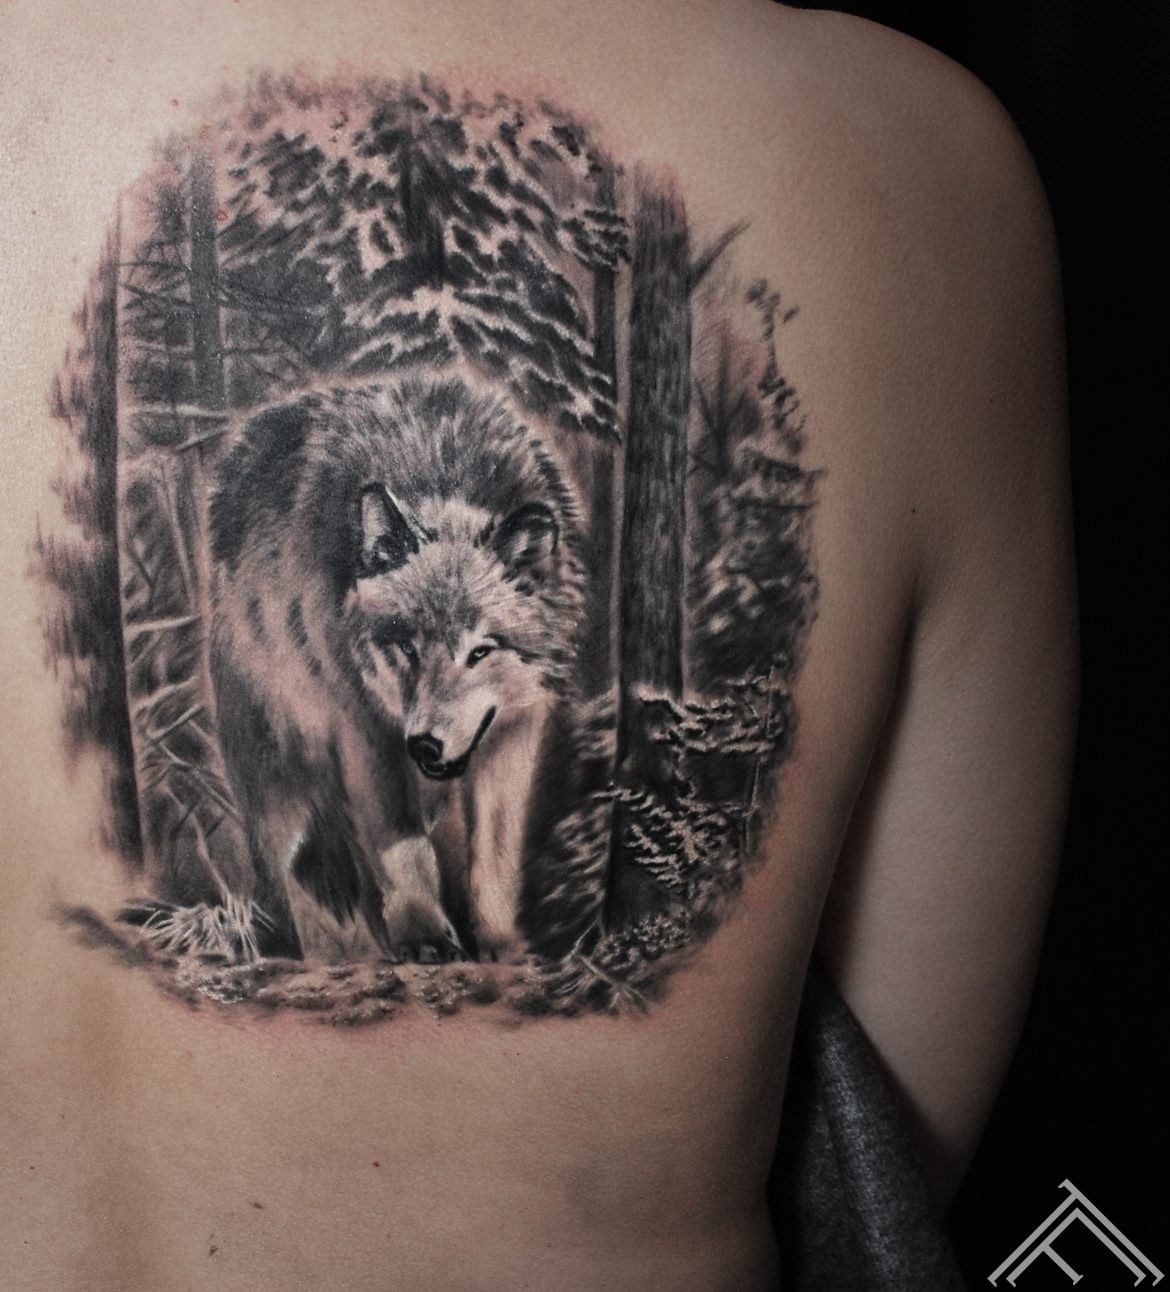 wolf-forest-vilks-mezs-trees-nature-tattoofrequency-riga-art-andersontattoo